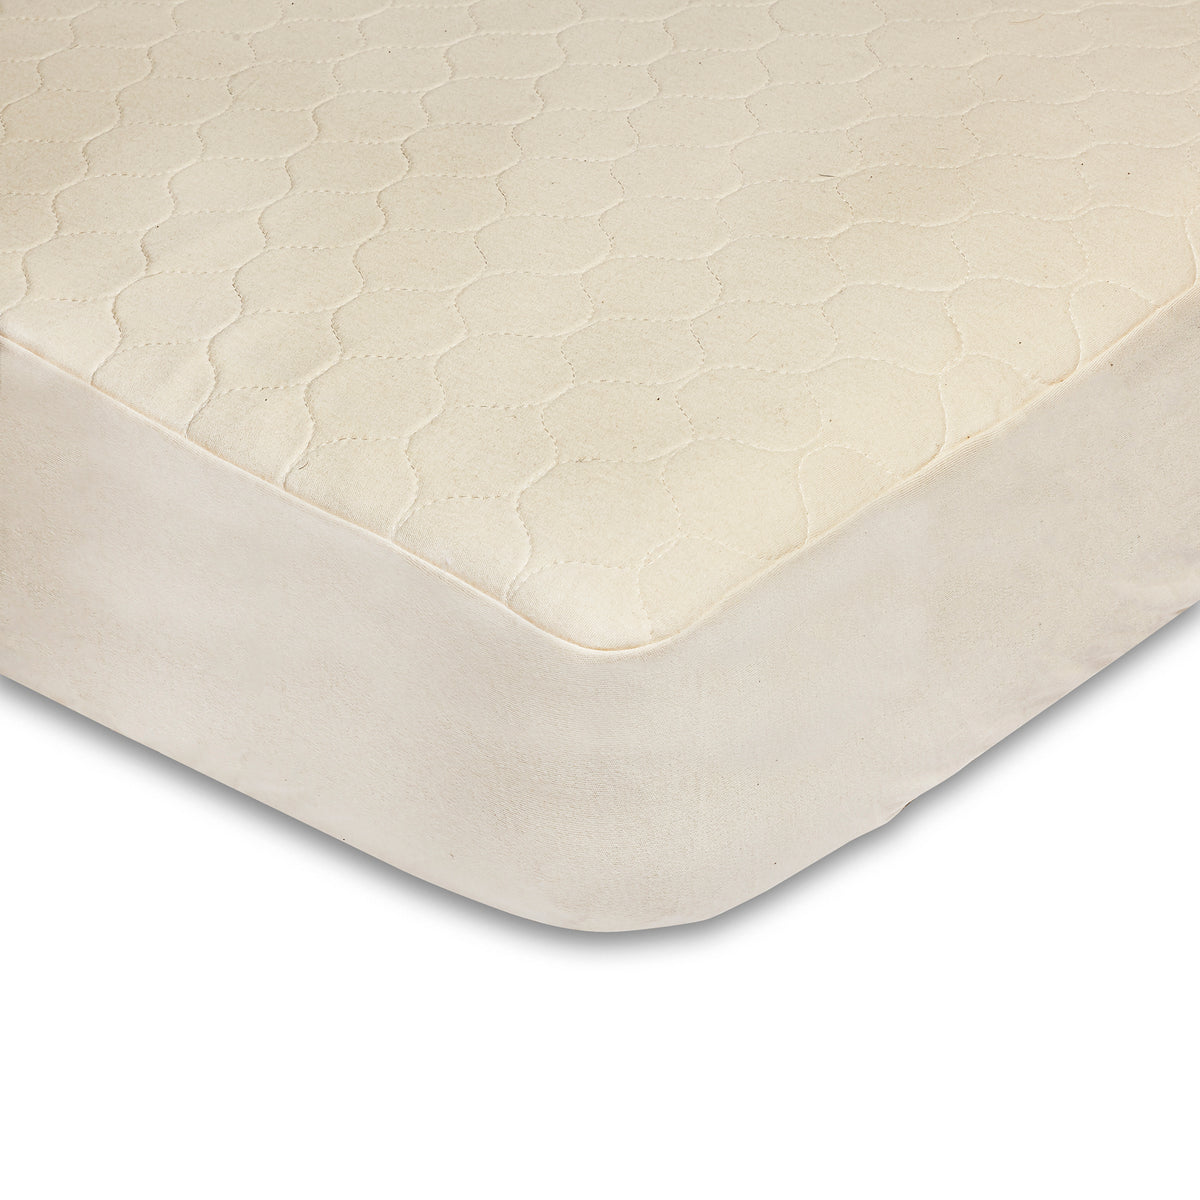 TL Care Mini Crib Size Waterproof Fitted Quilted Mattress Pad Portable Cover